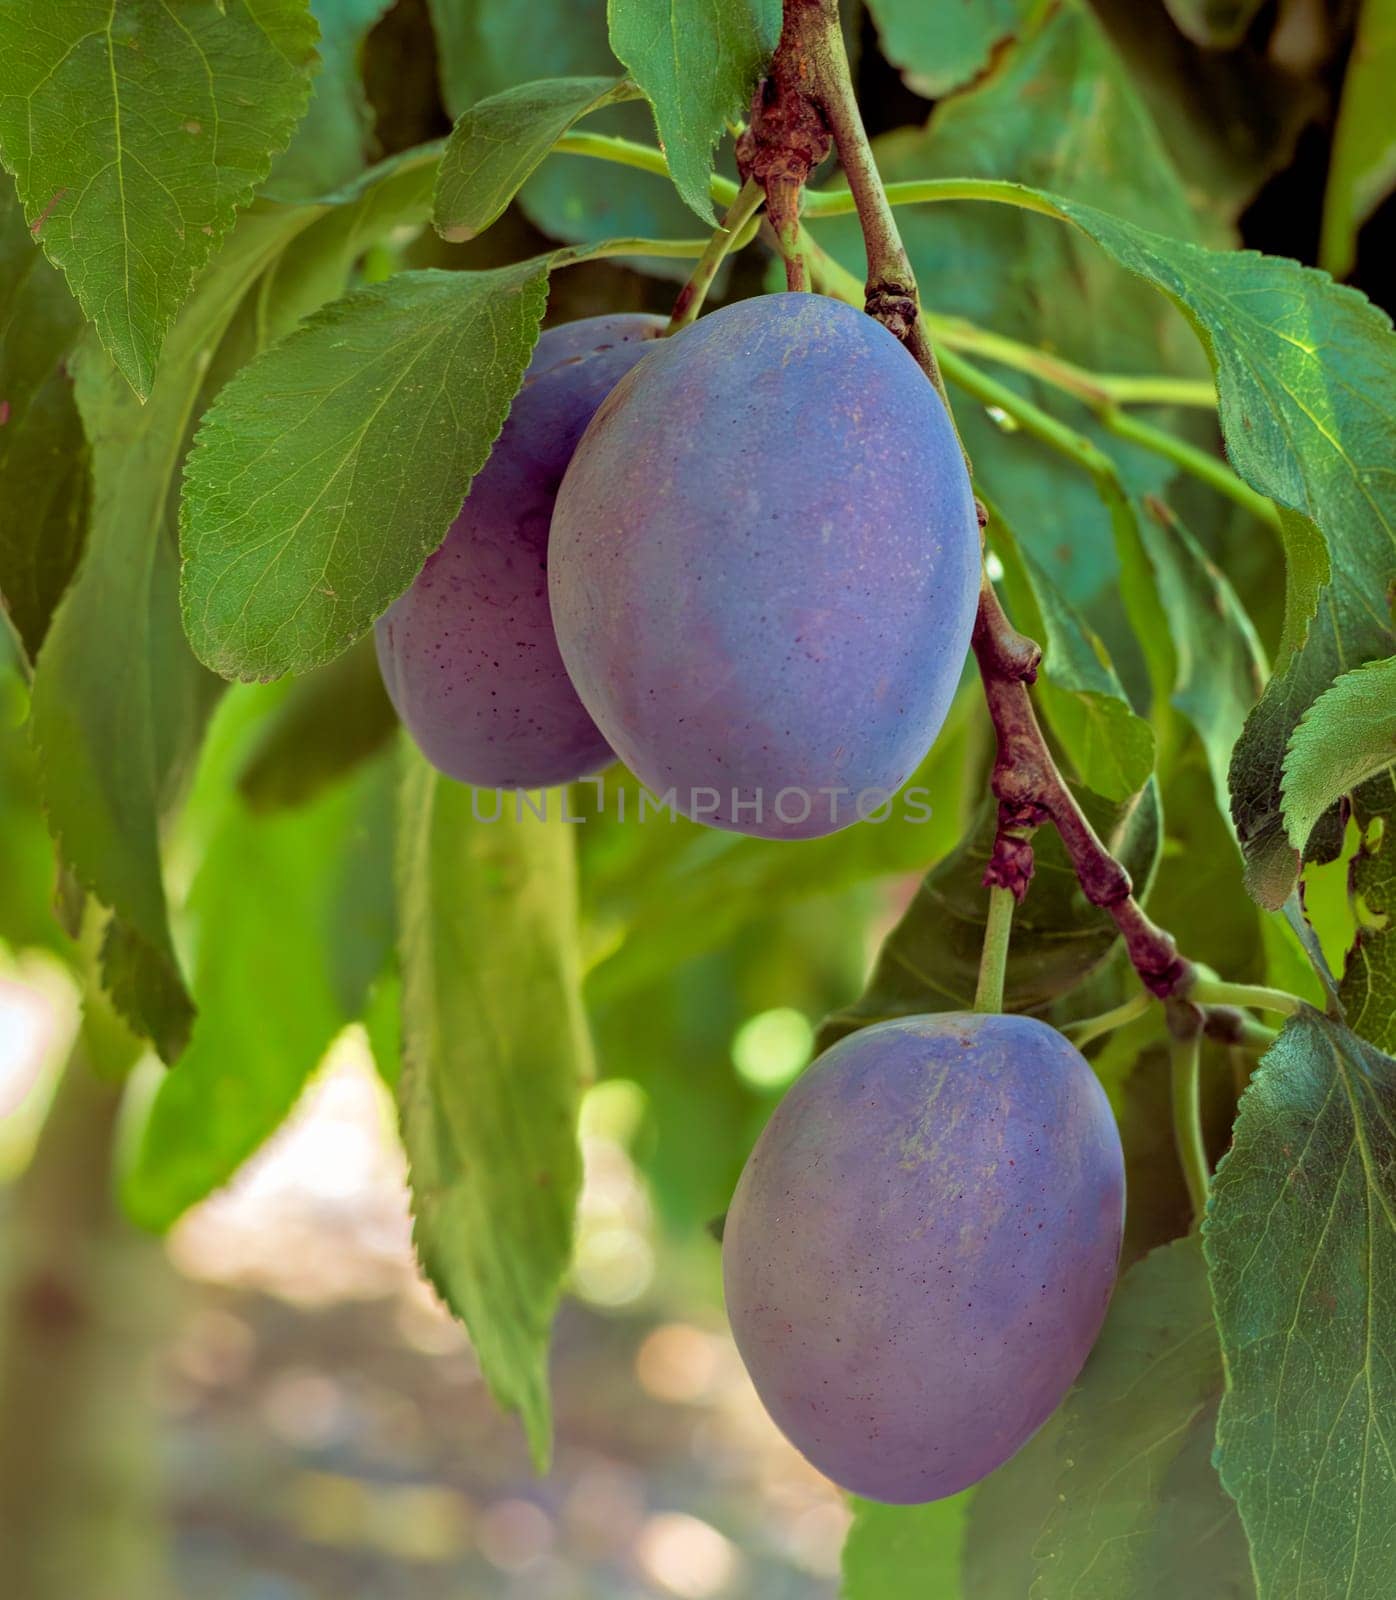 Prune plums on a brench. Ripen blue plums growing among the leaves by Imagenet